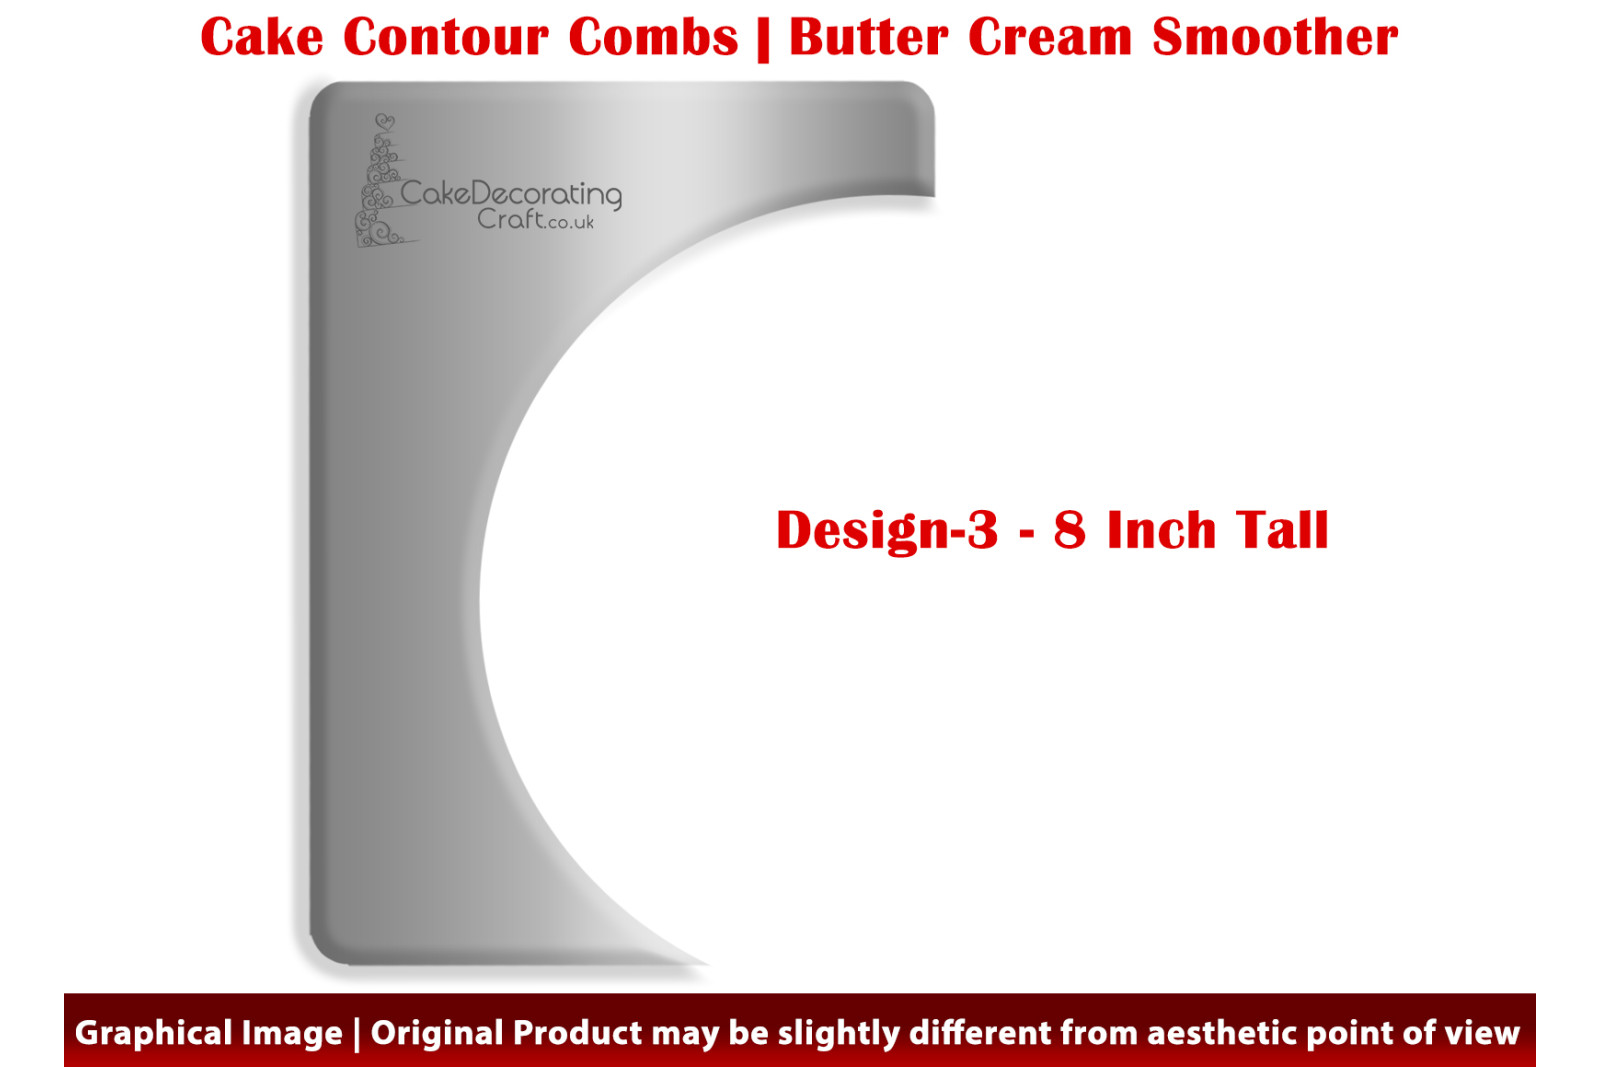 Spherical Miracle | Design 3 | 8 Inch | Cake Decorating Craft | Cake Contour Combs | Smoothing | Metal Spreader | Butter Cream Smoothing | Genius Tool